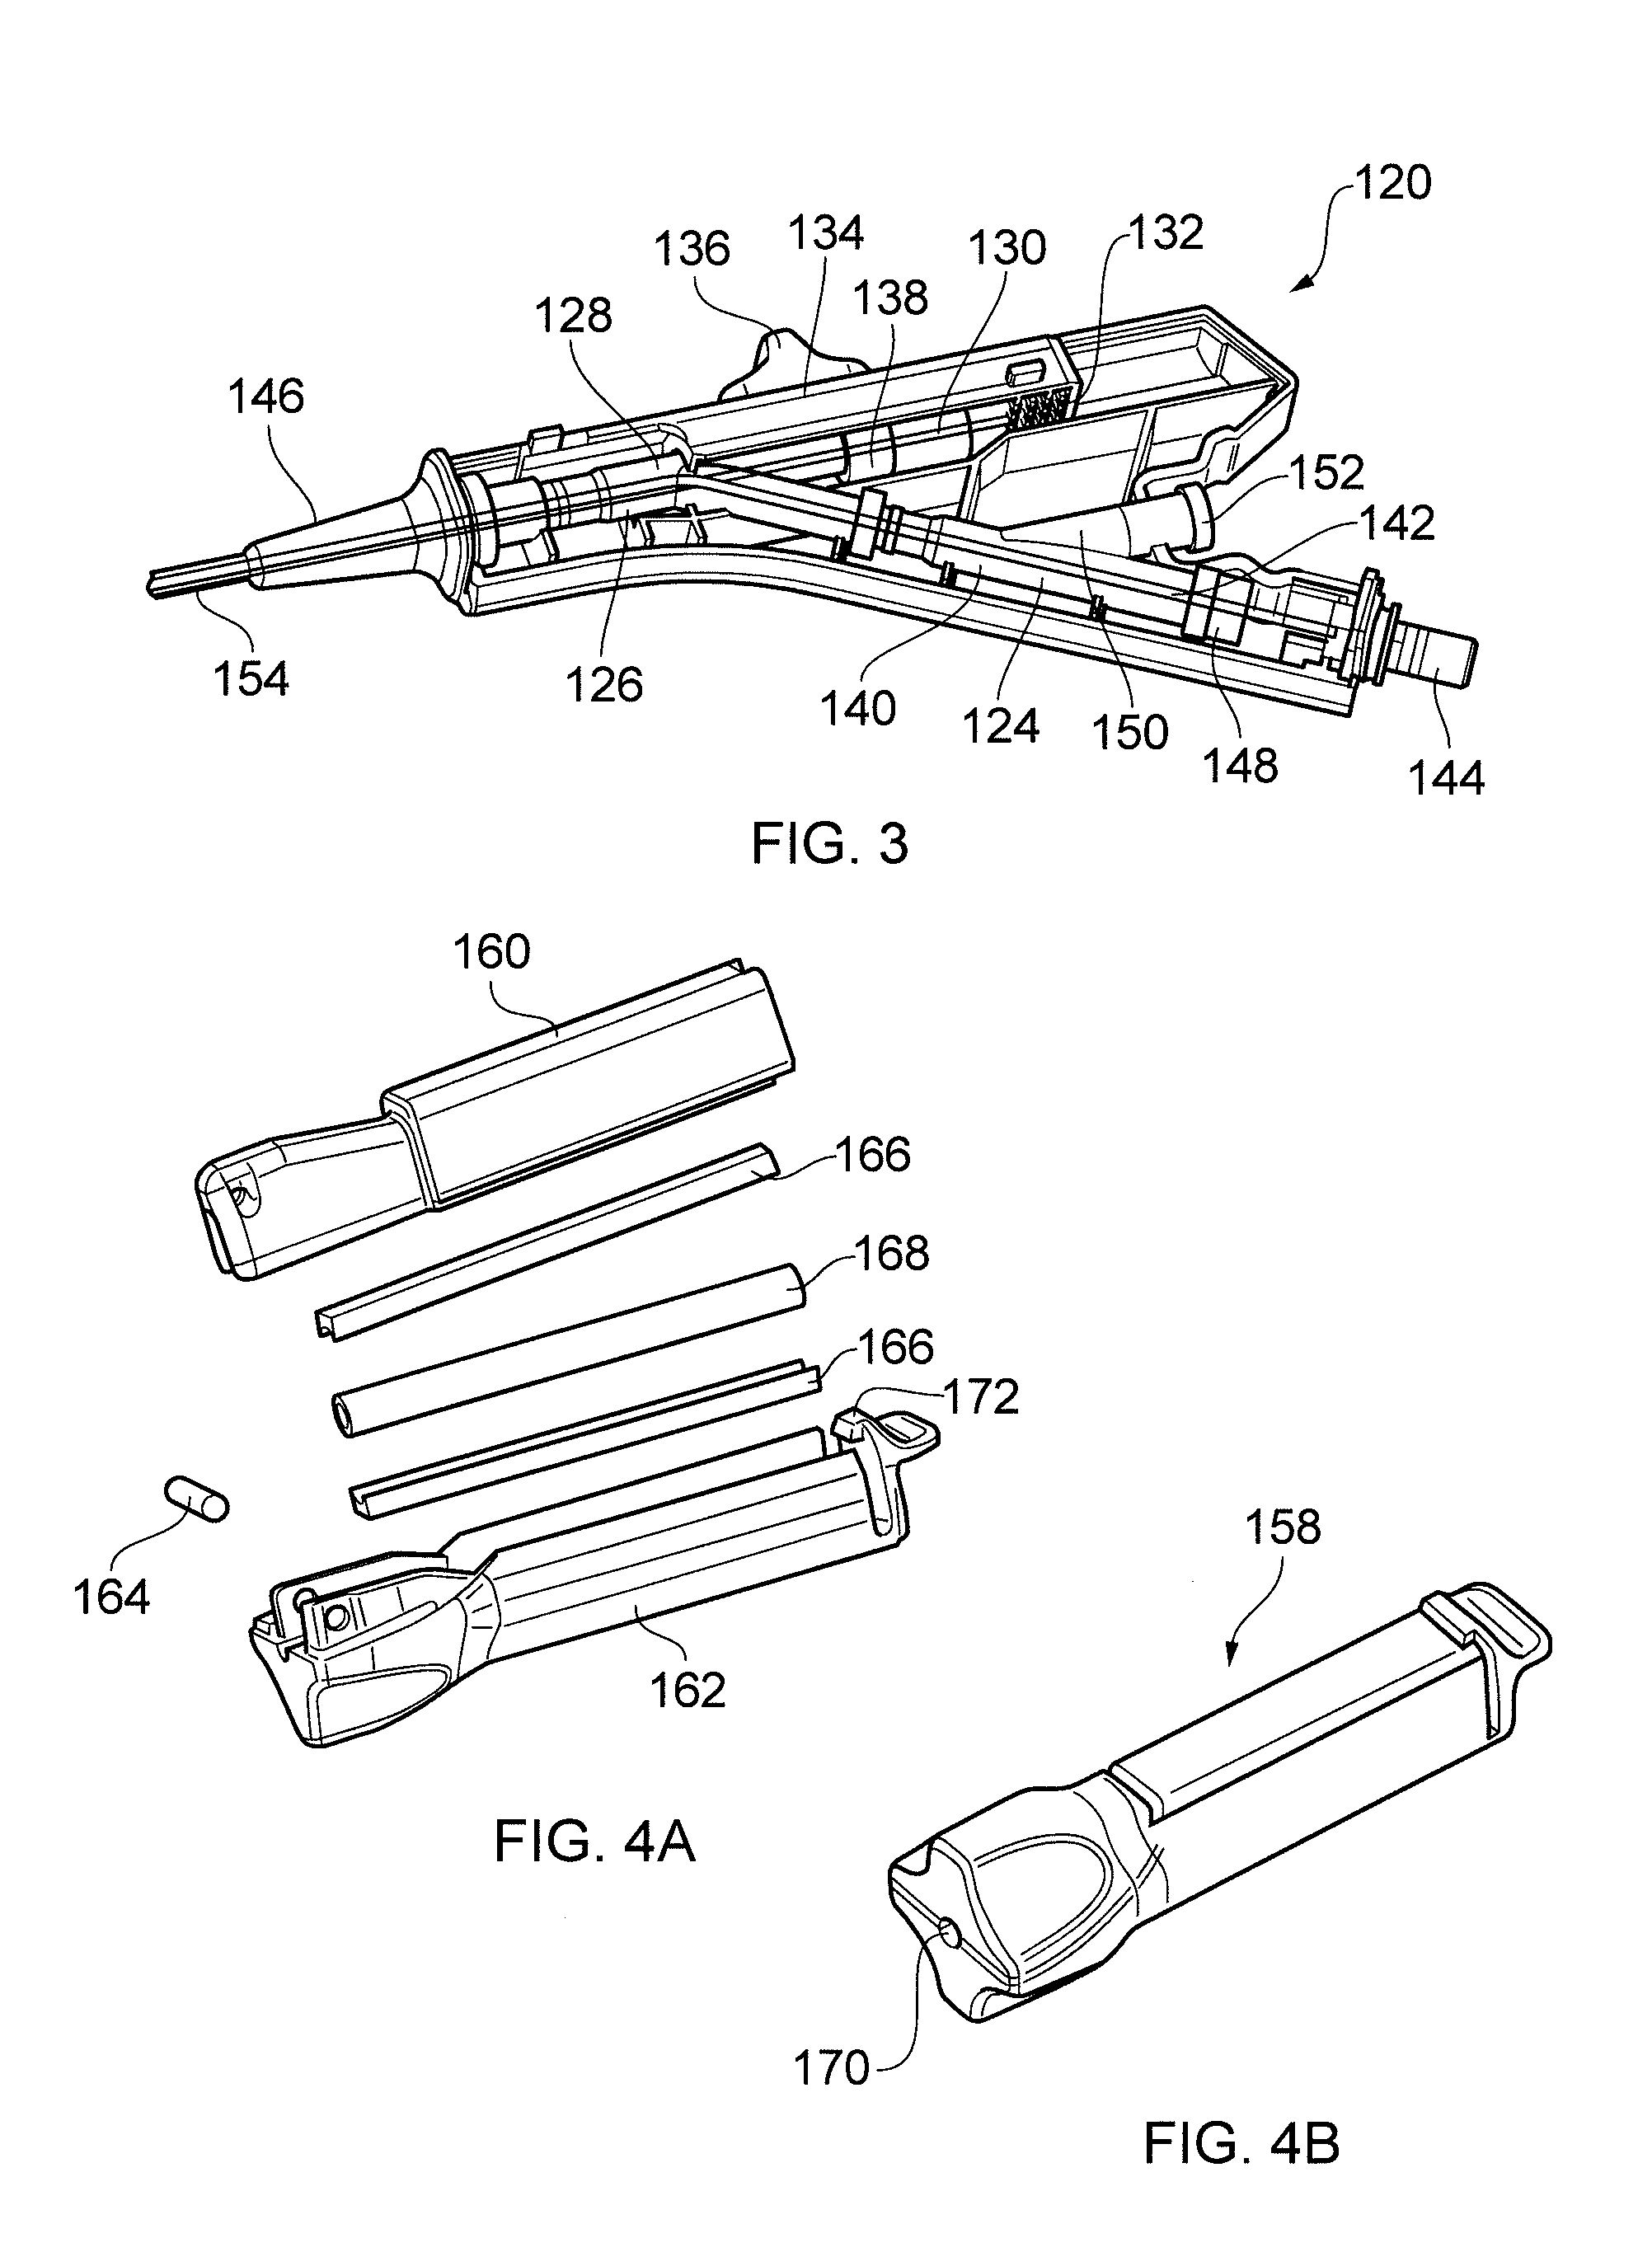 Electrosurgical apparatus for delivering RF and/or microwave energy into biological tissue